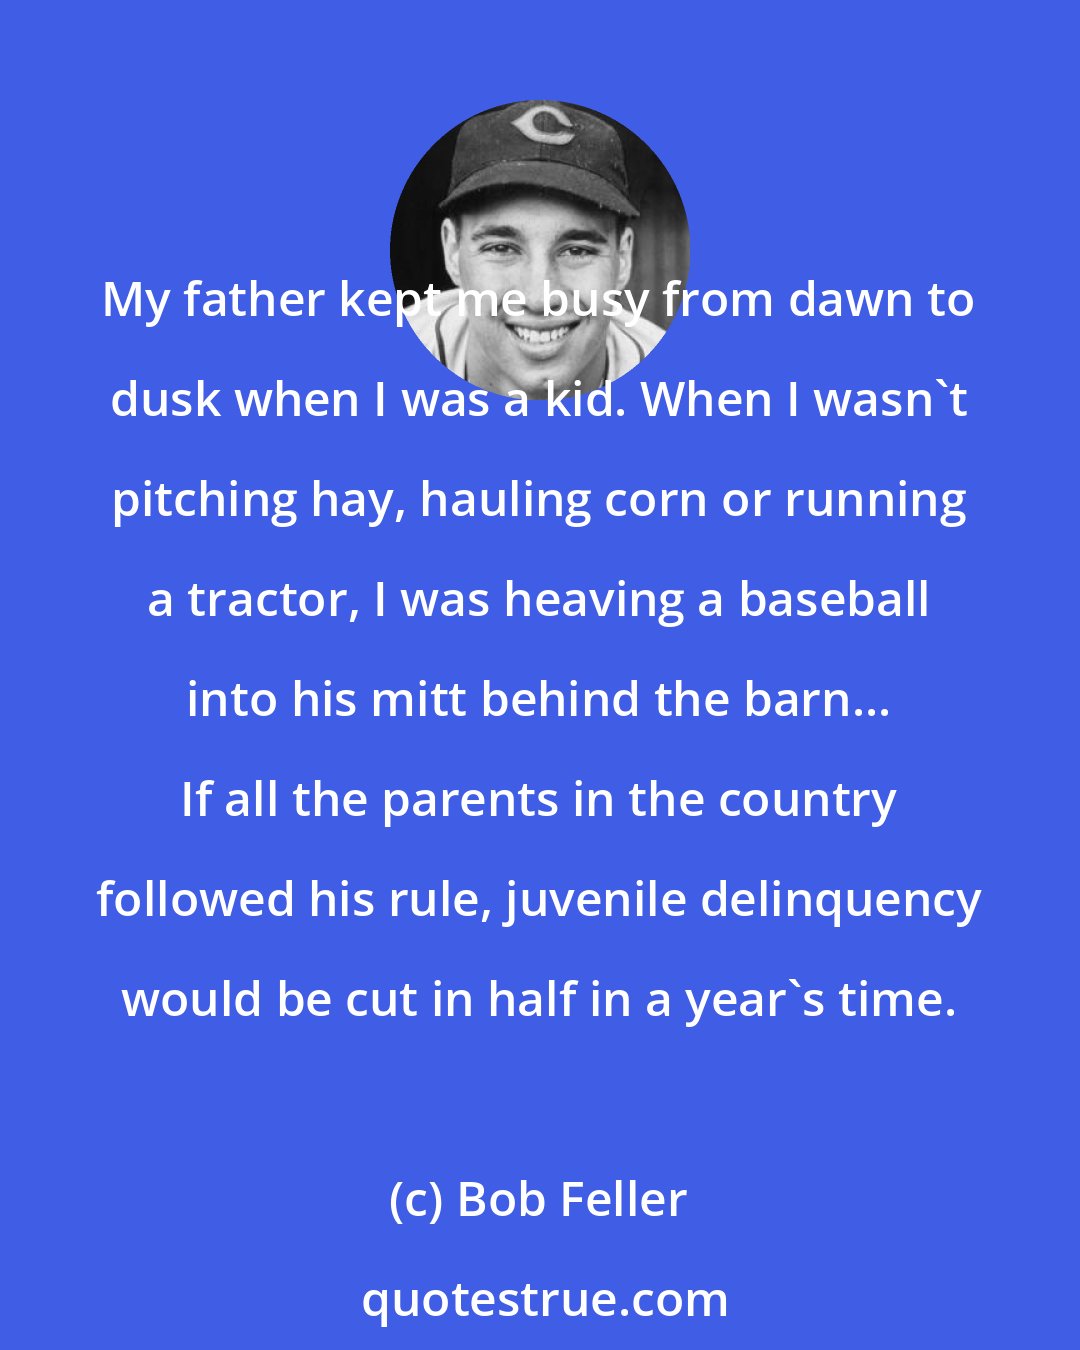 Bob Feller: My father kept me busy from dawn to dusk when I was a kid. When I wasn't pitching hay, hauling corn or running a tractor, I was heaving a baseball into his mitt behind the barn... If all the parents in the country followed his rule, juvenile delinquency would be cut in half in a year's time.